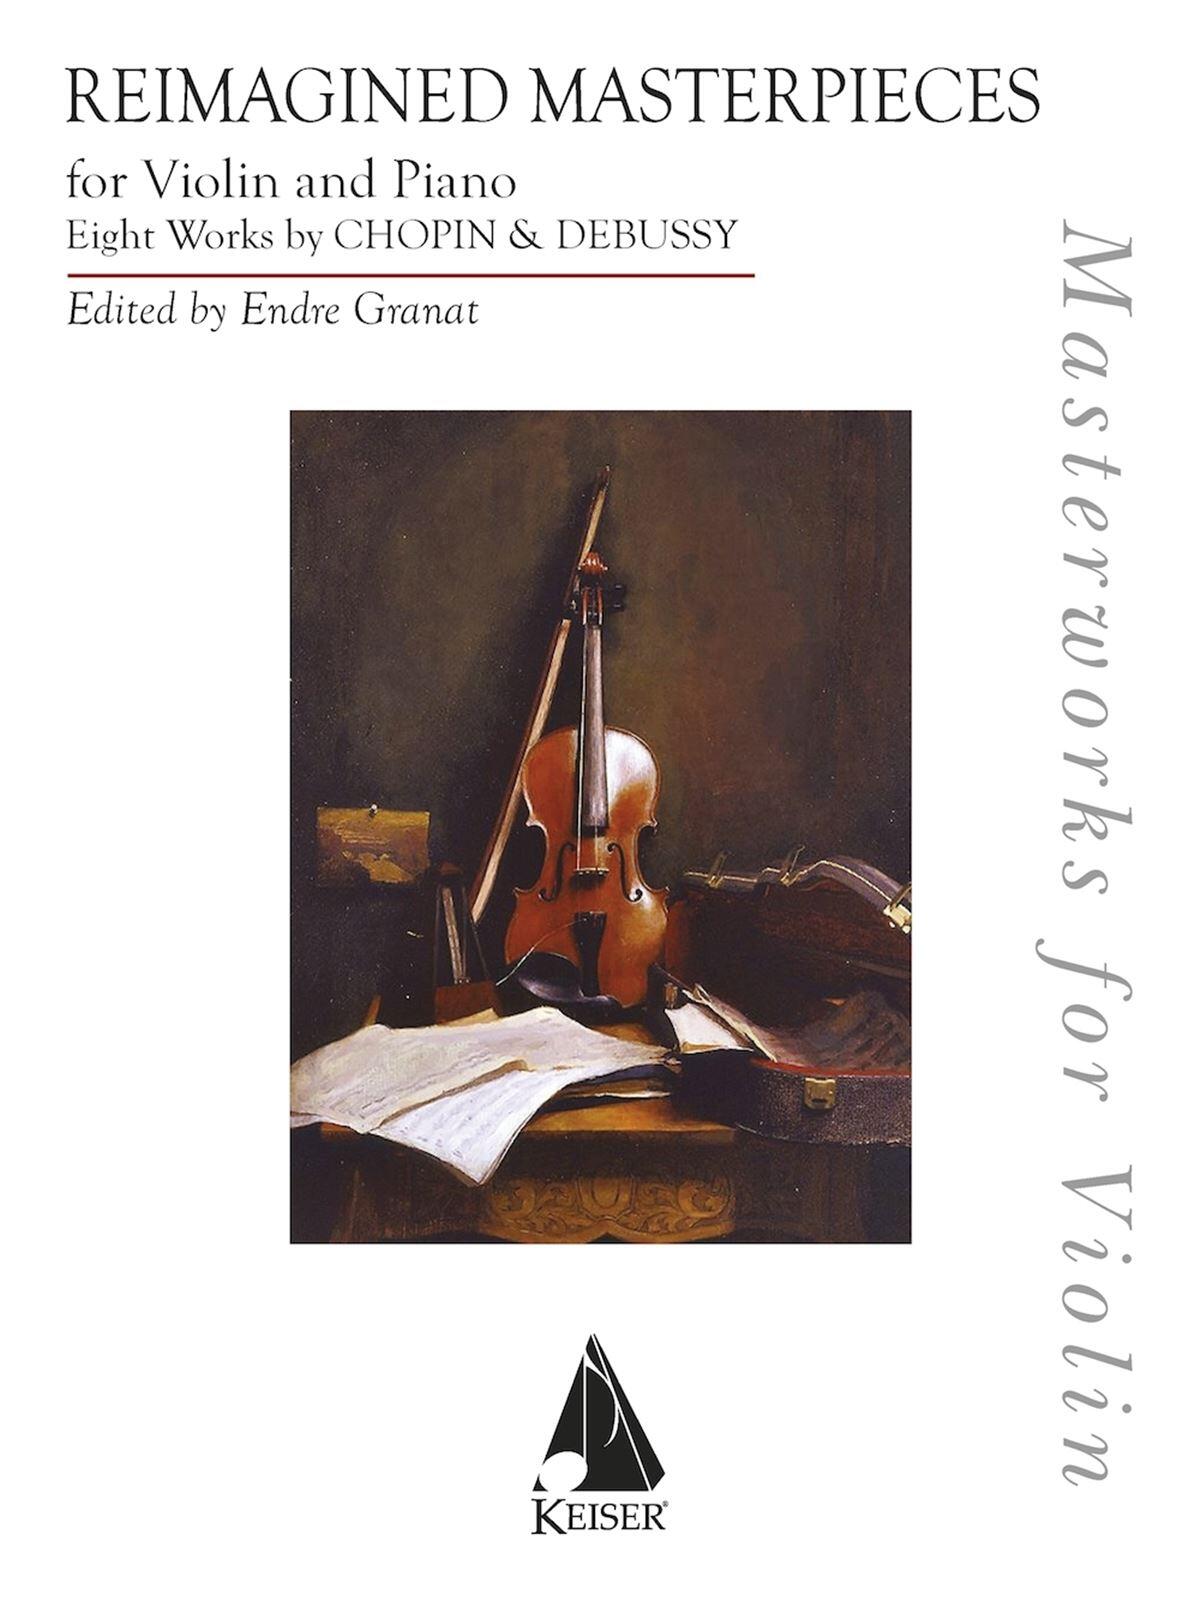 Reimagined Masterpieces for Violin and Piano 8 Works of Chopin and Debussy : photo 1